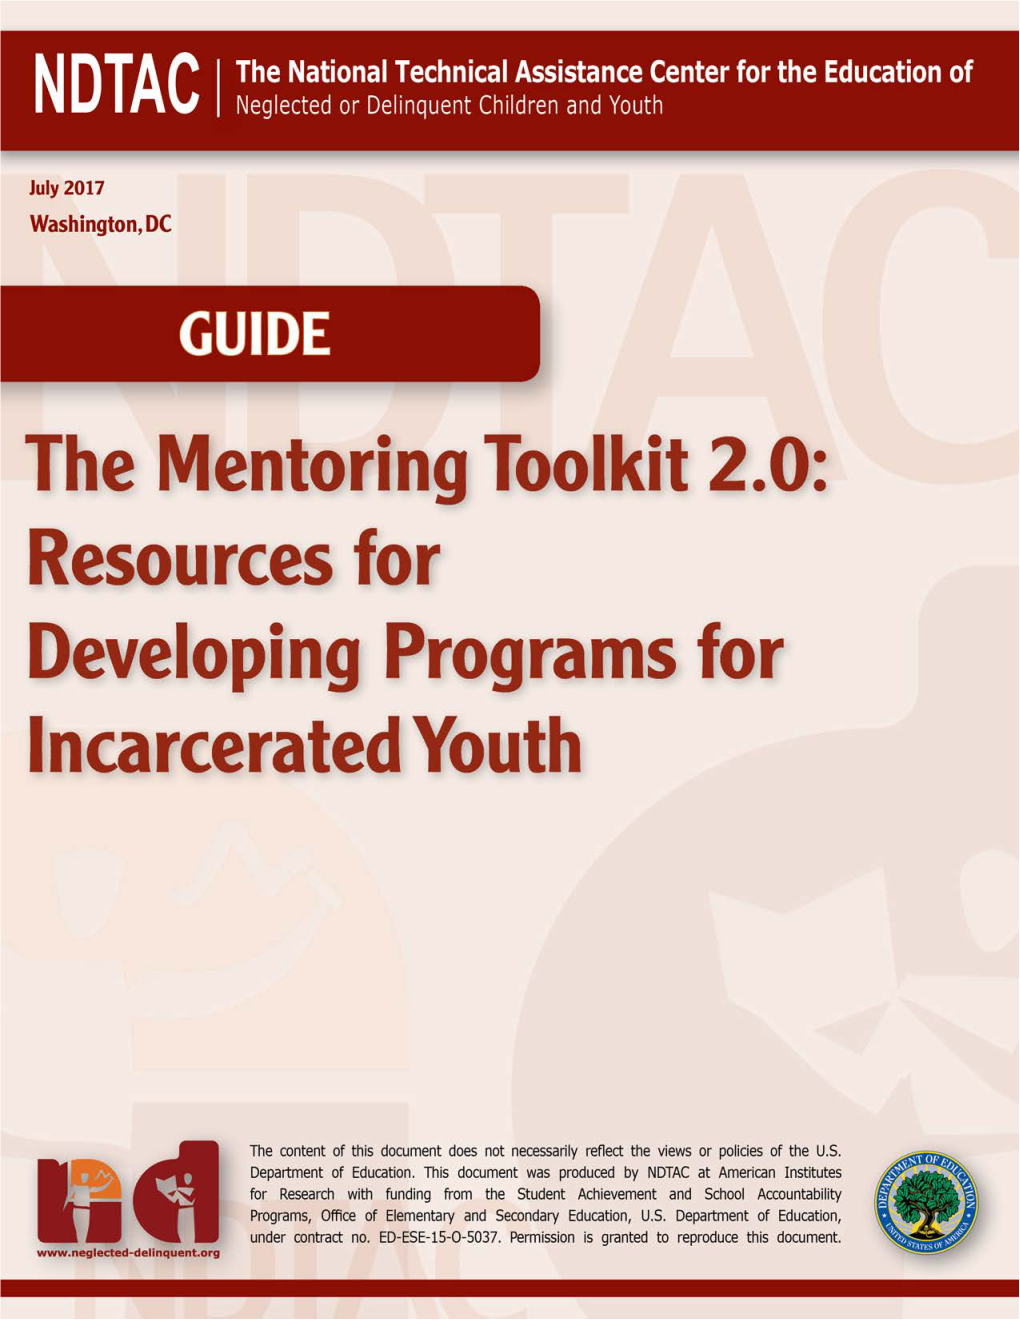 The Mentoring Toolkit 2.0: Resources for Developing Programs for Incarcerated Youth